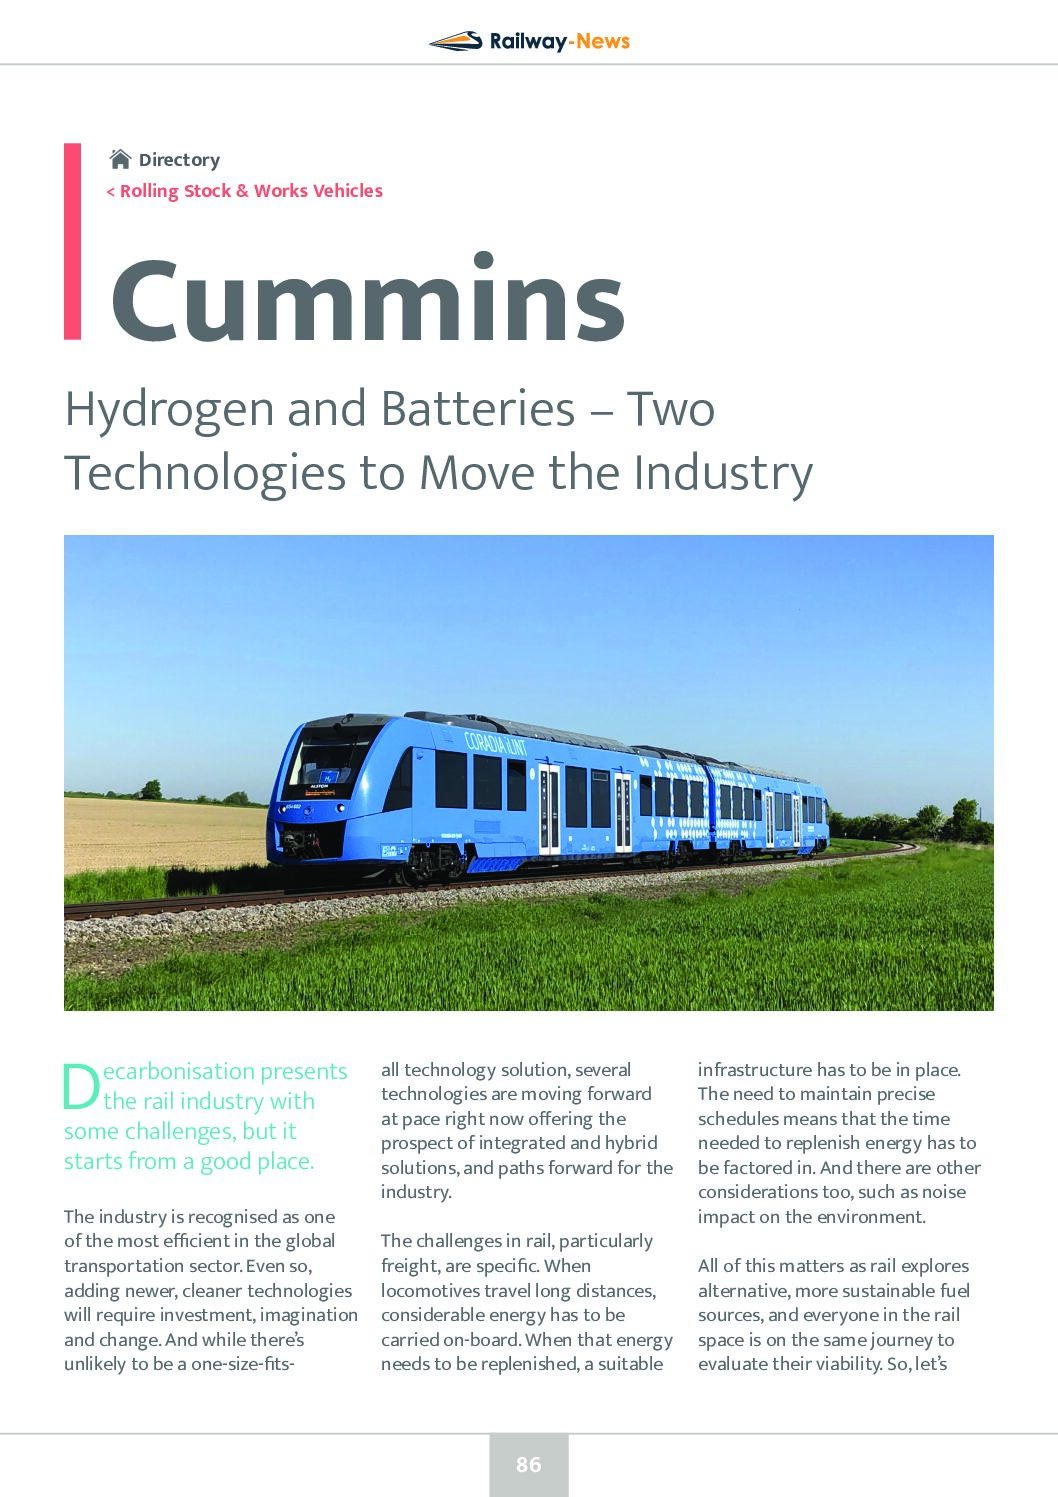 Hydrogen and Batteries – Two Technologies to Move the Industry